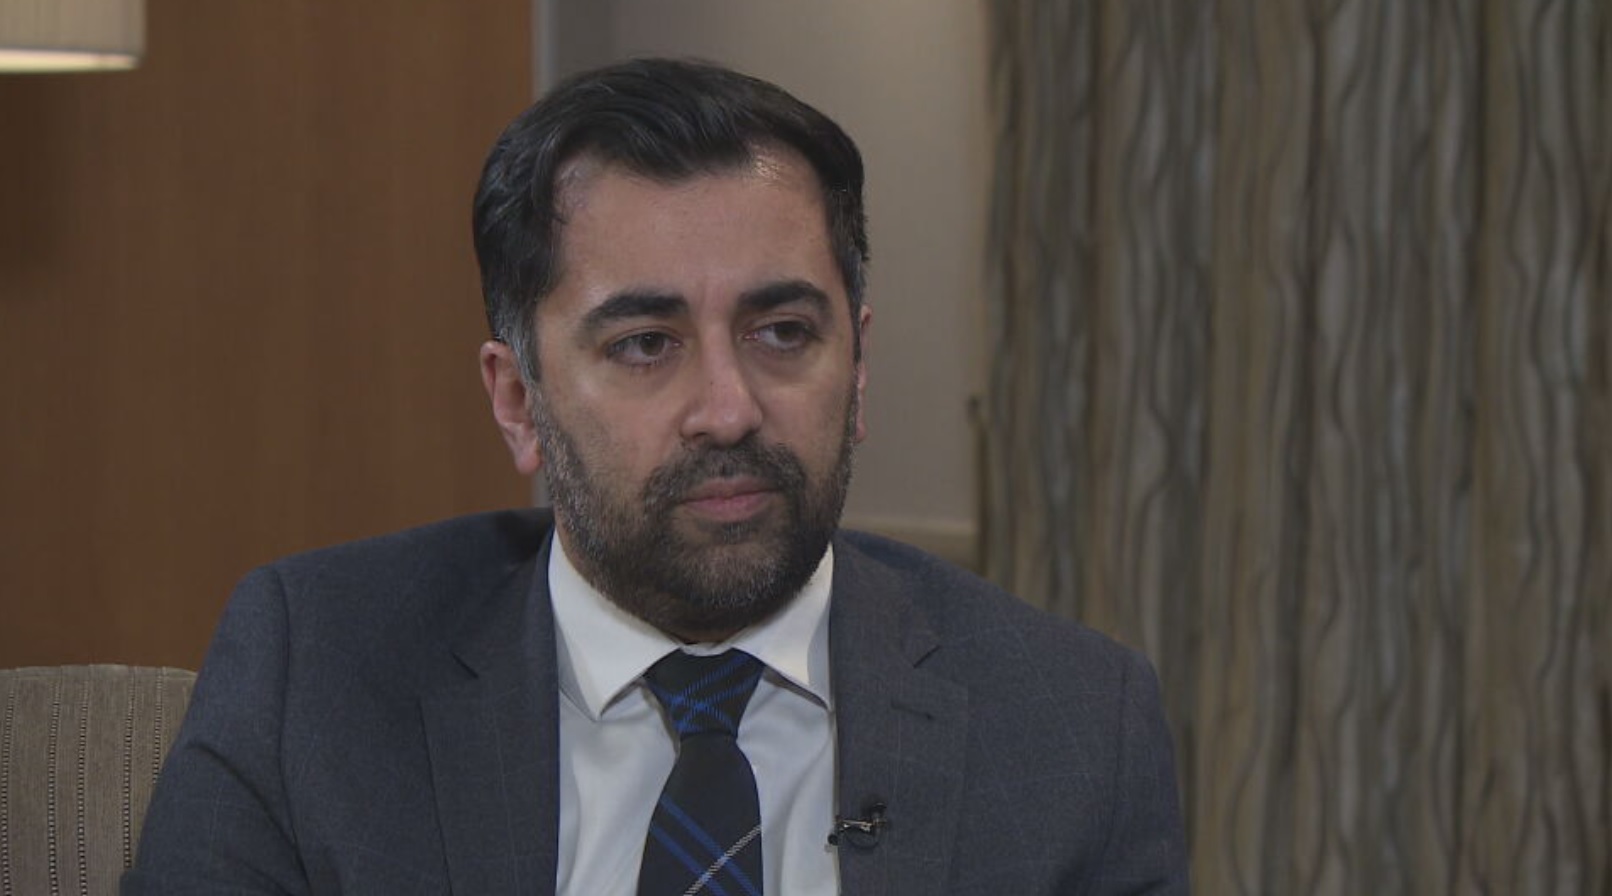 Humza Yousaf faced a grilling form his rivals.